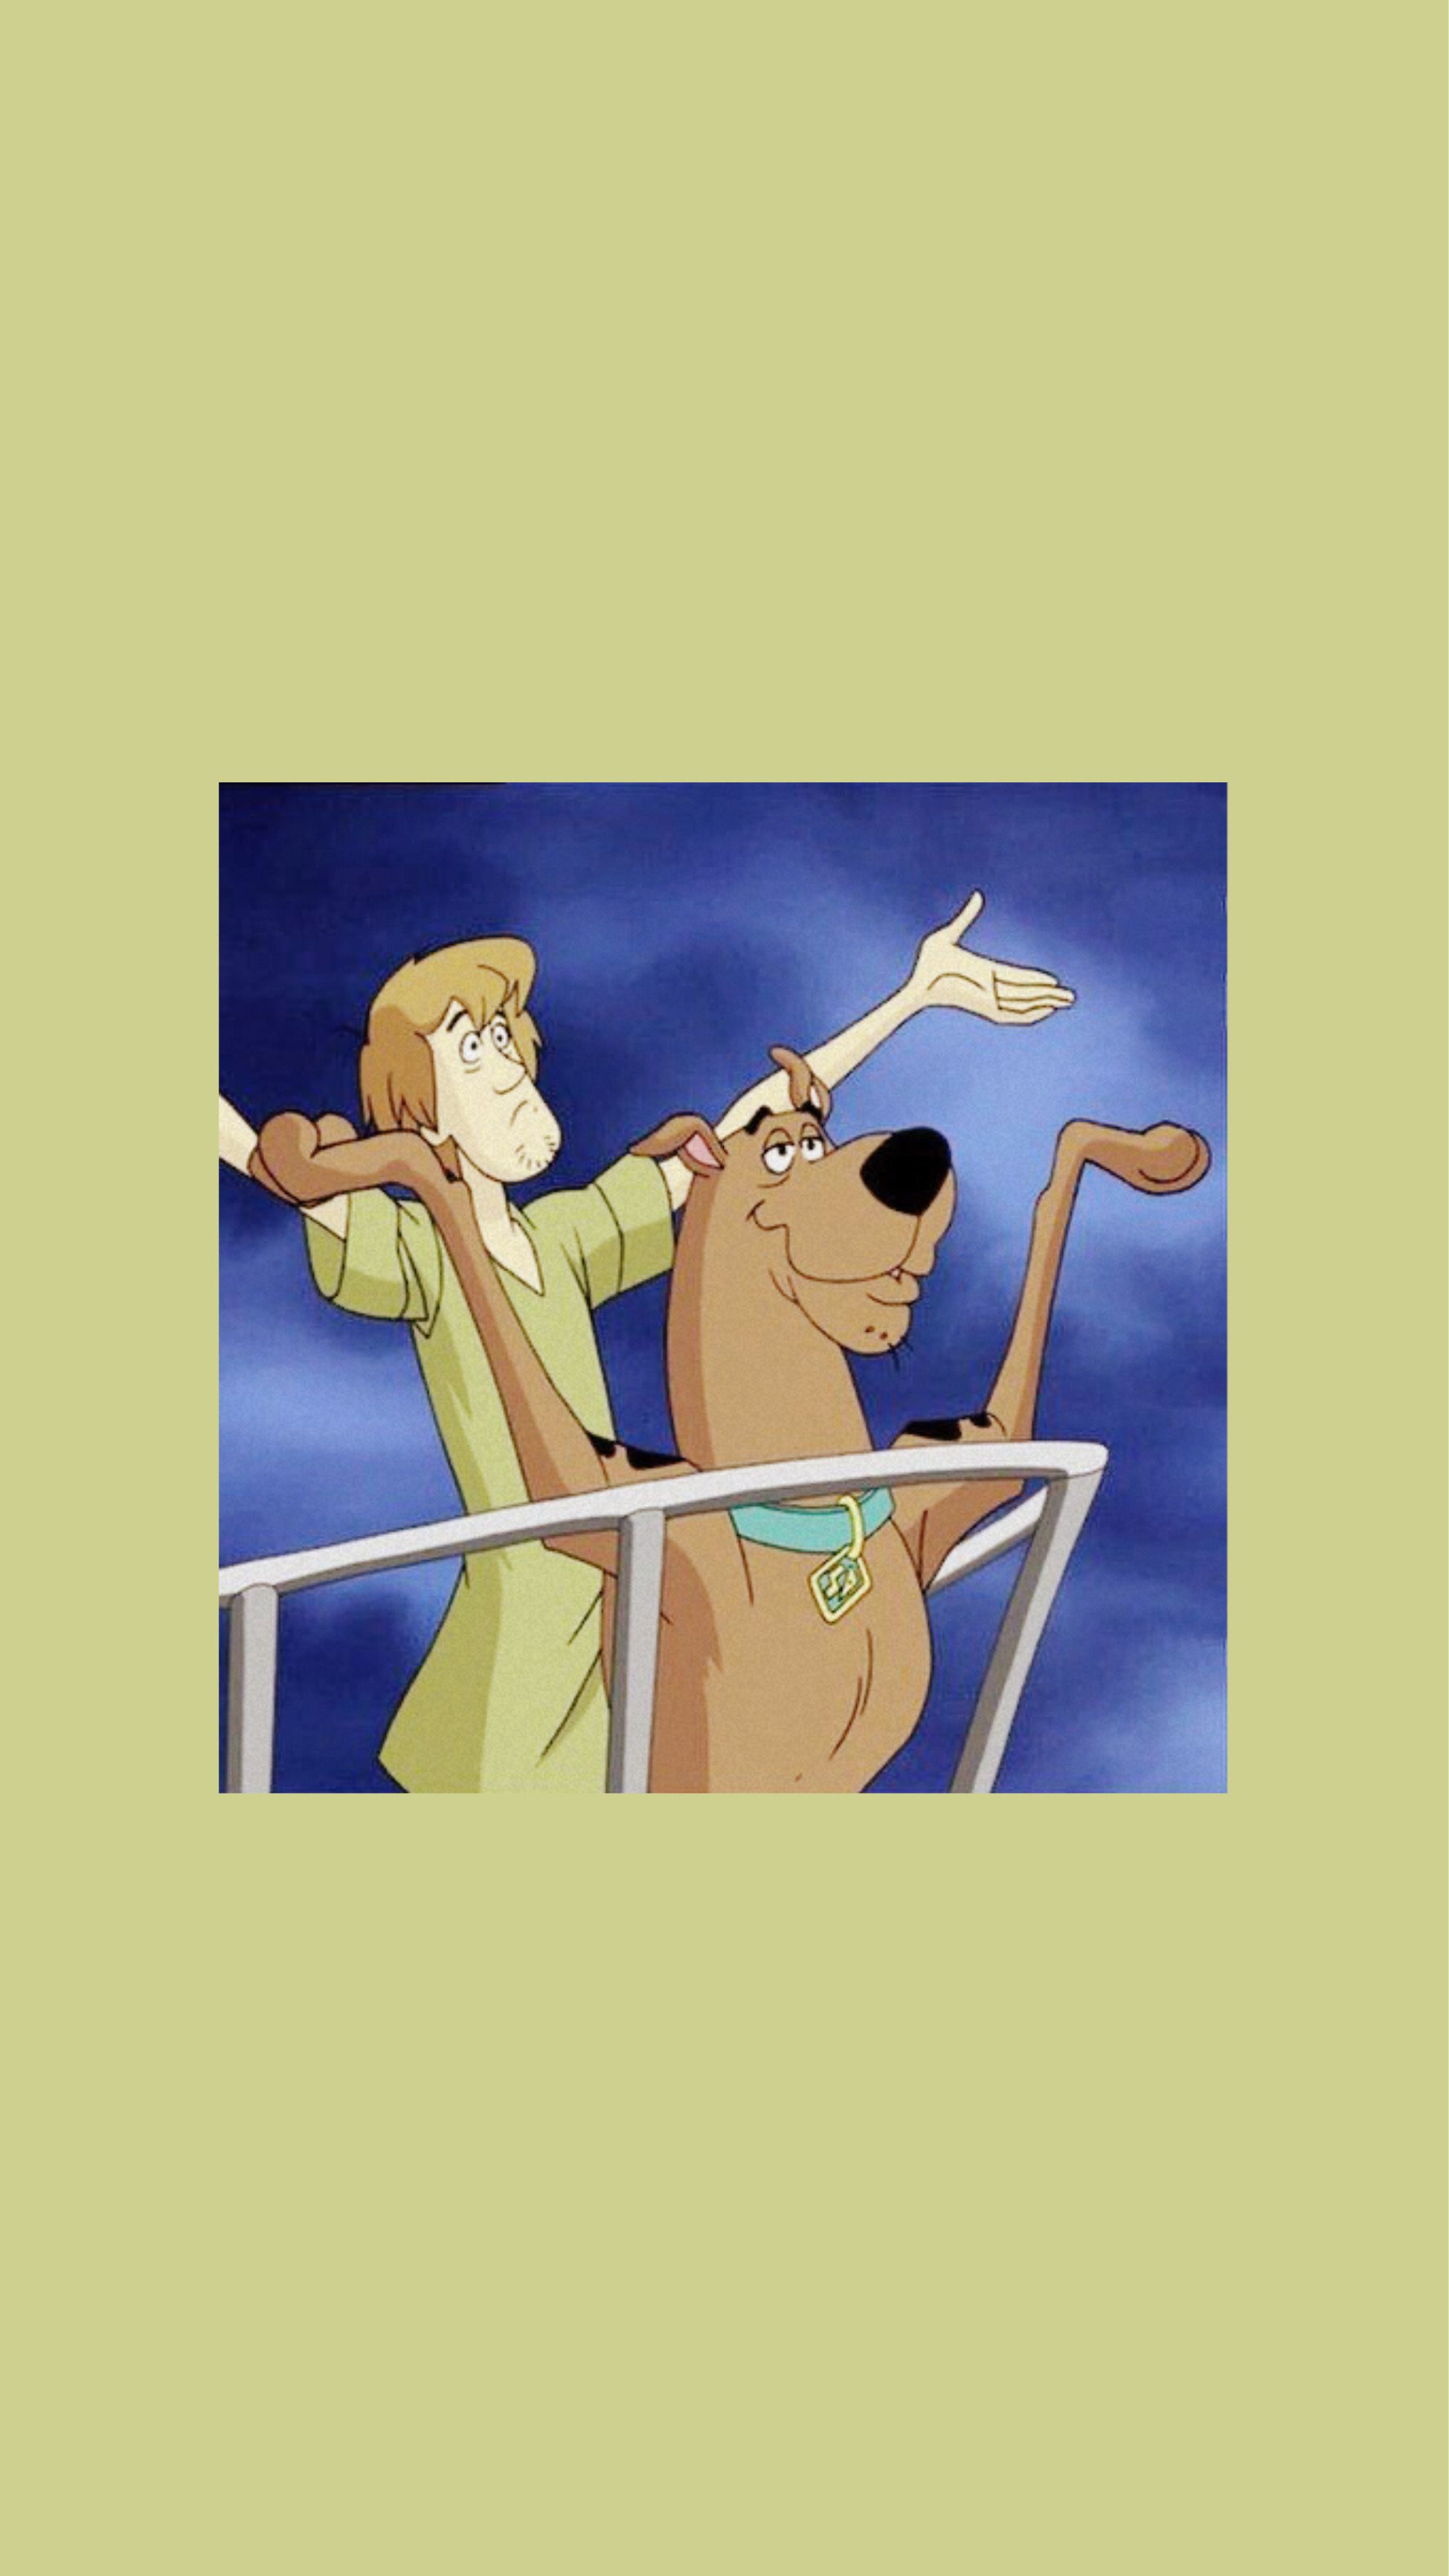  Scooby-Doo Hintergrundbild 1948x3464. Scooby and Shaggy's Adventure in the Great Outdoors